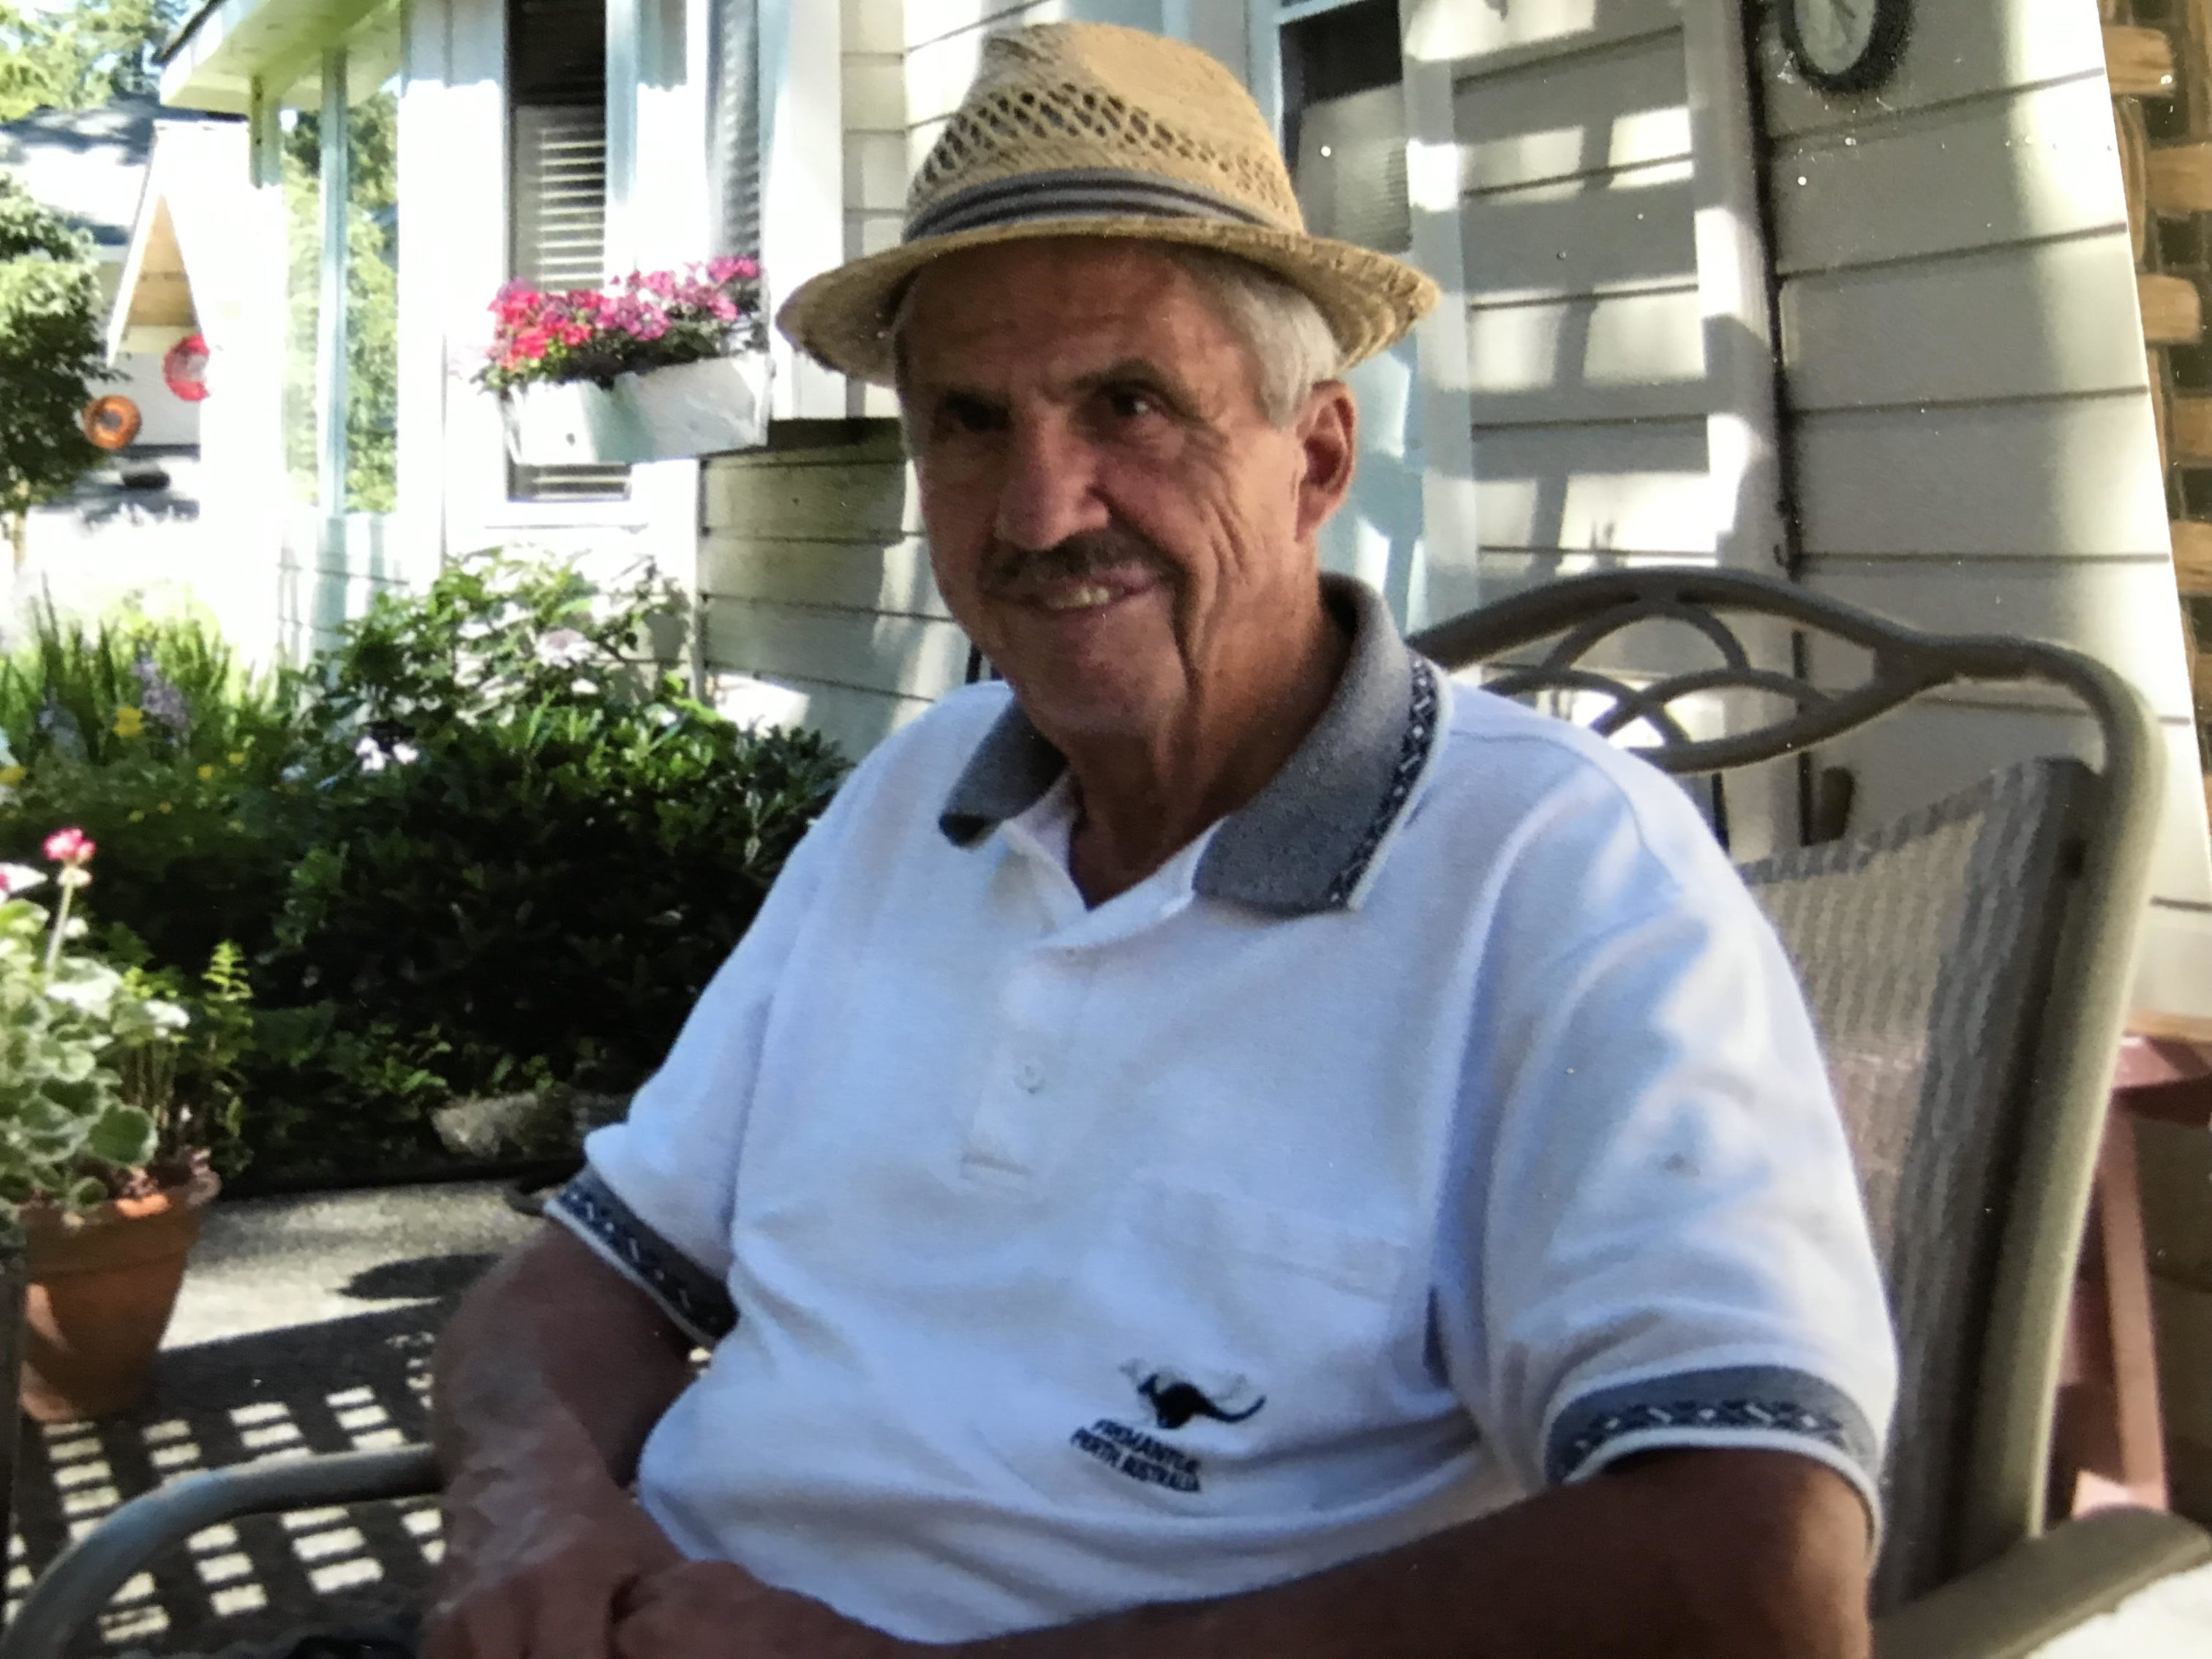 Word has reached us of the passing of longtime British Columbia aftermarket professional Bill Russel at the age of 82.